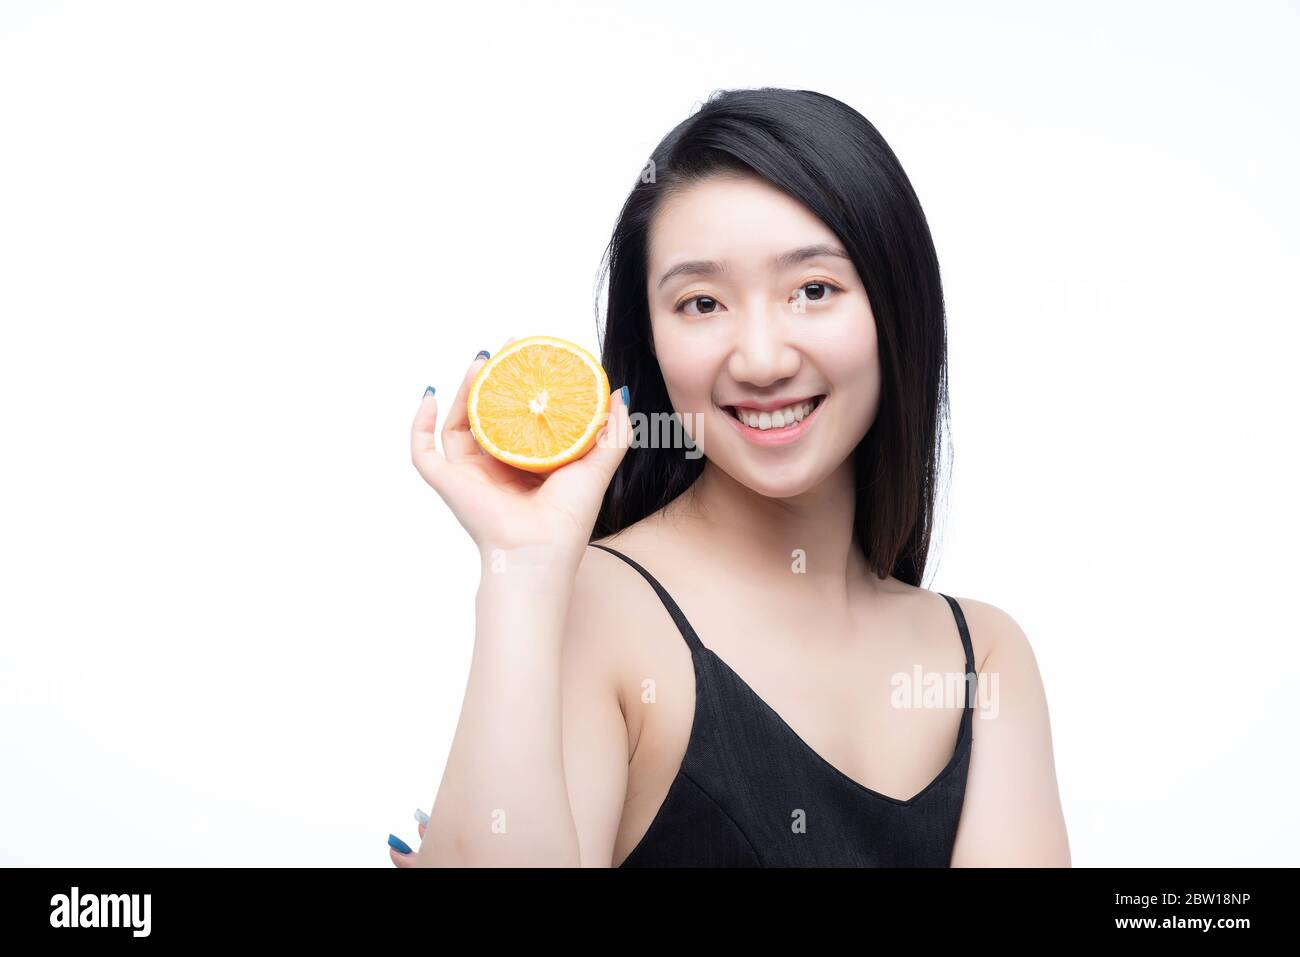 A young Asian woman beauty Stock Photo